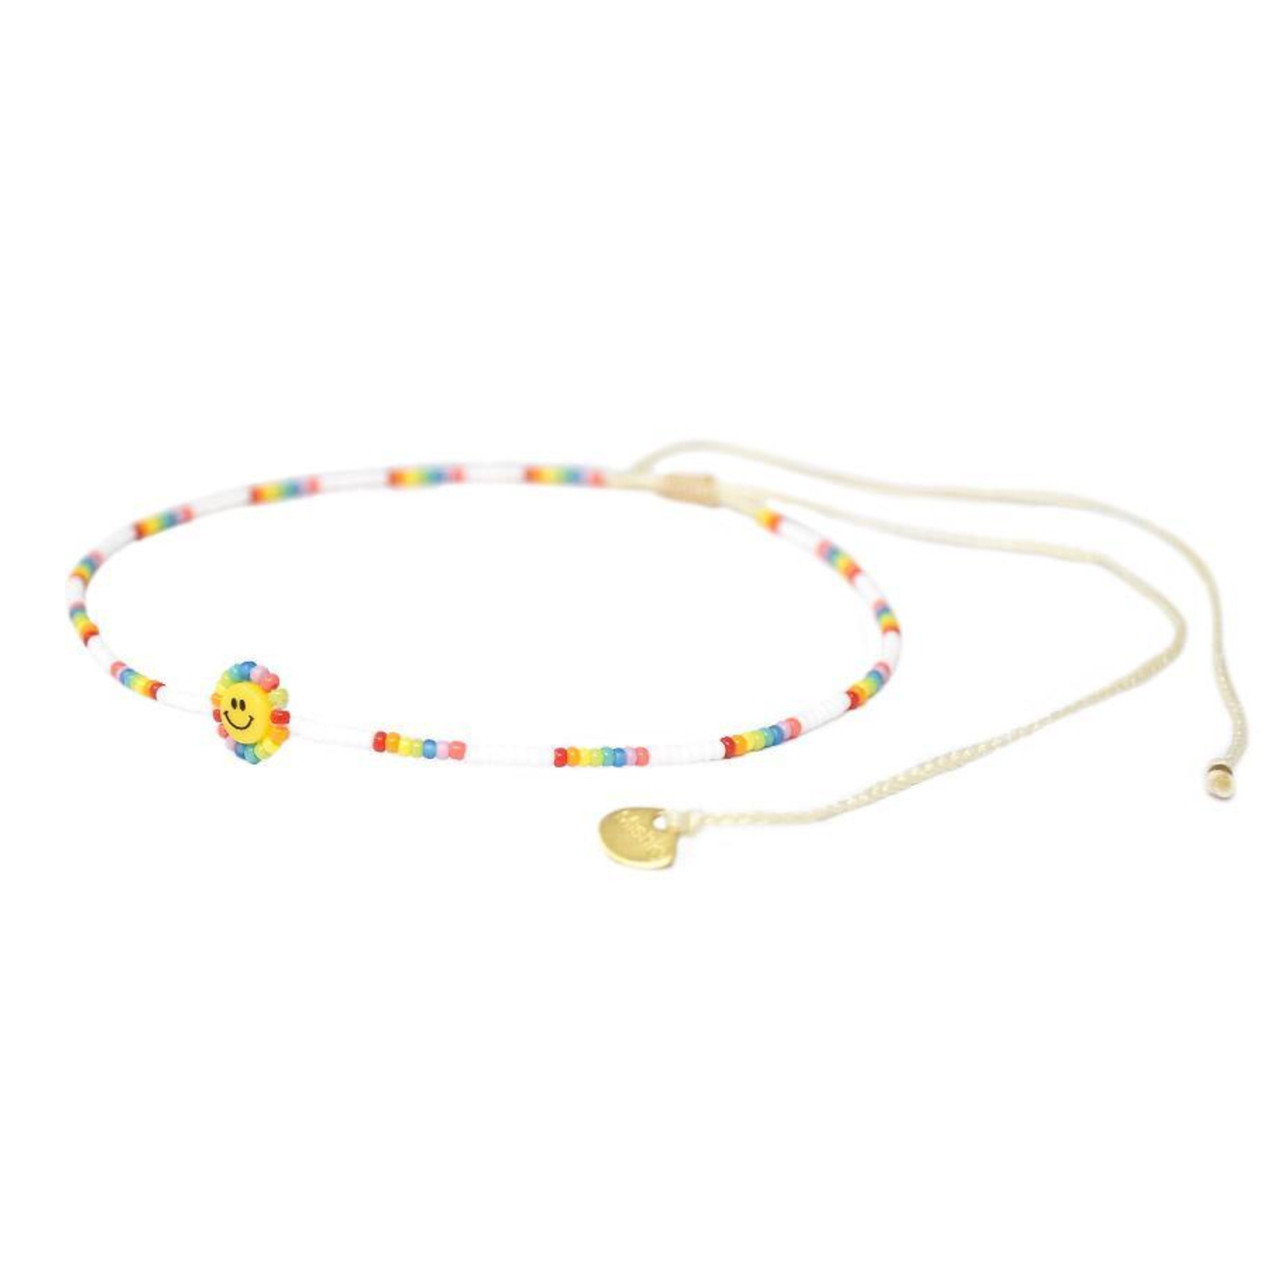 Happy Rainbow Friendship Bracelet by Mishky available to shop online at tomfoolery London